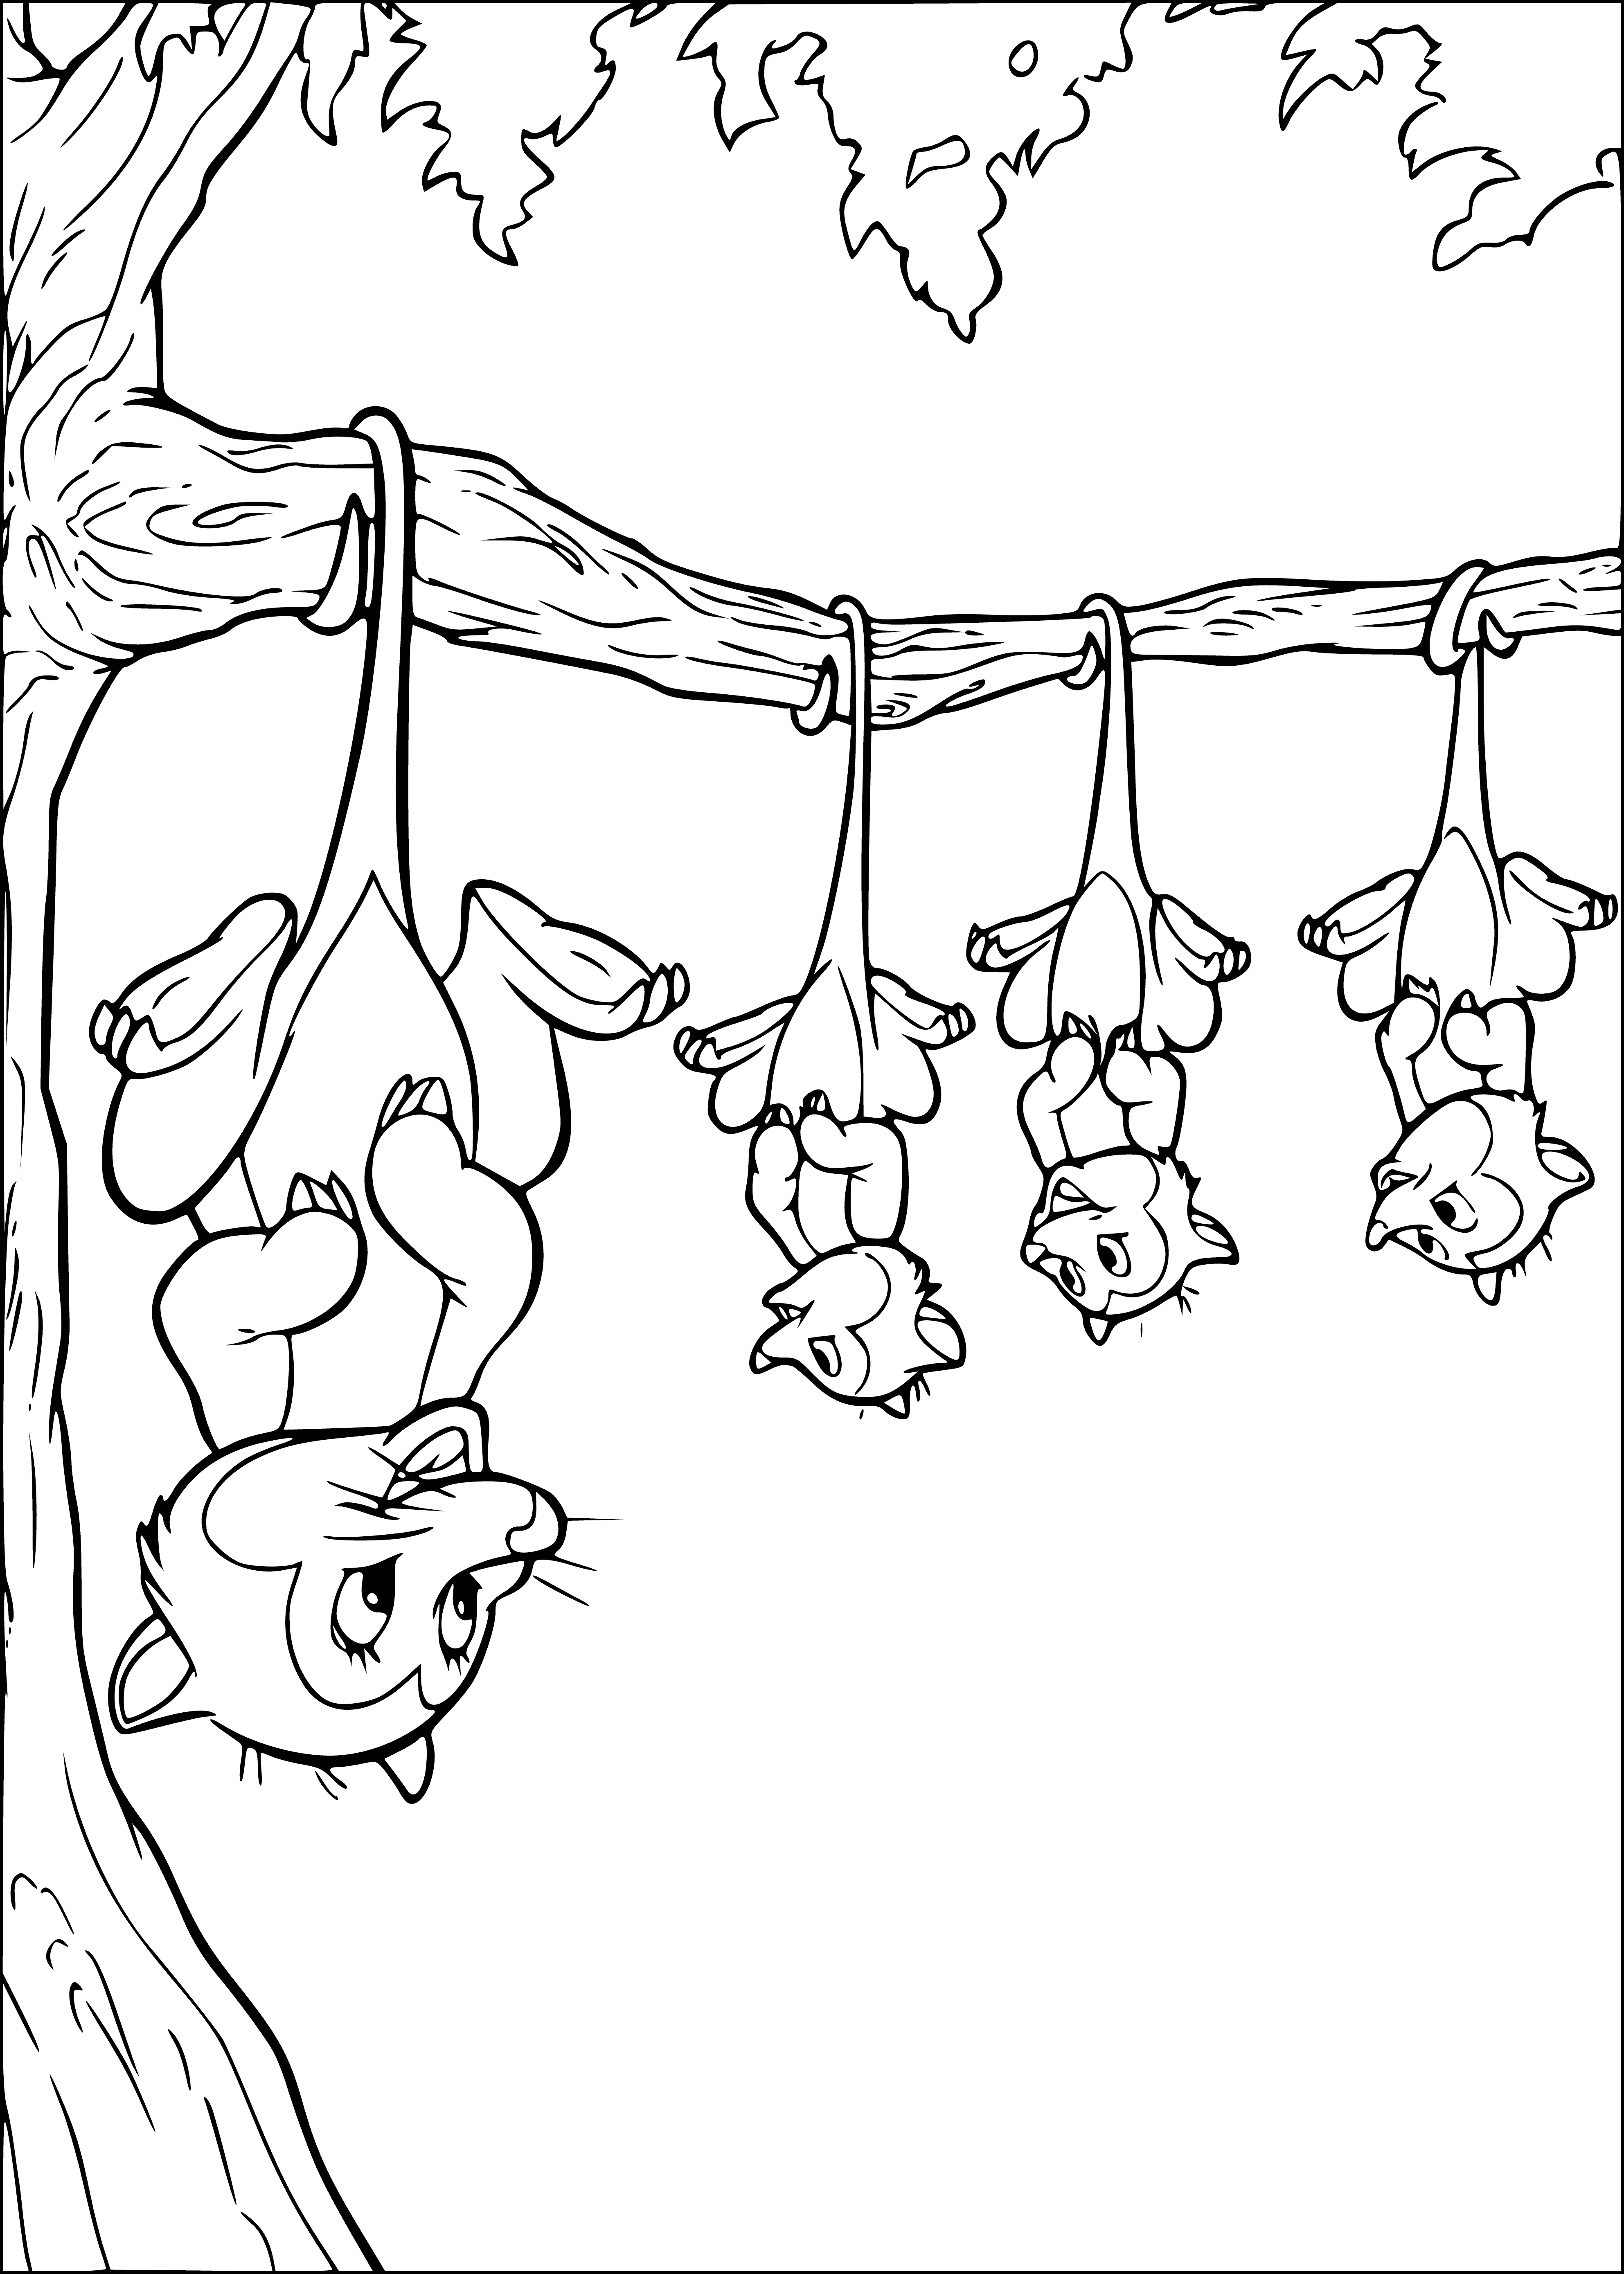 coloring page: A possum hangs from a tree, eyes closed, furrry tail, pointy snout - looks like it's sleeping.